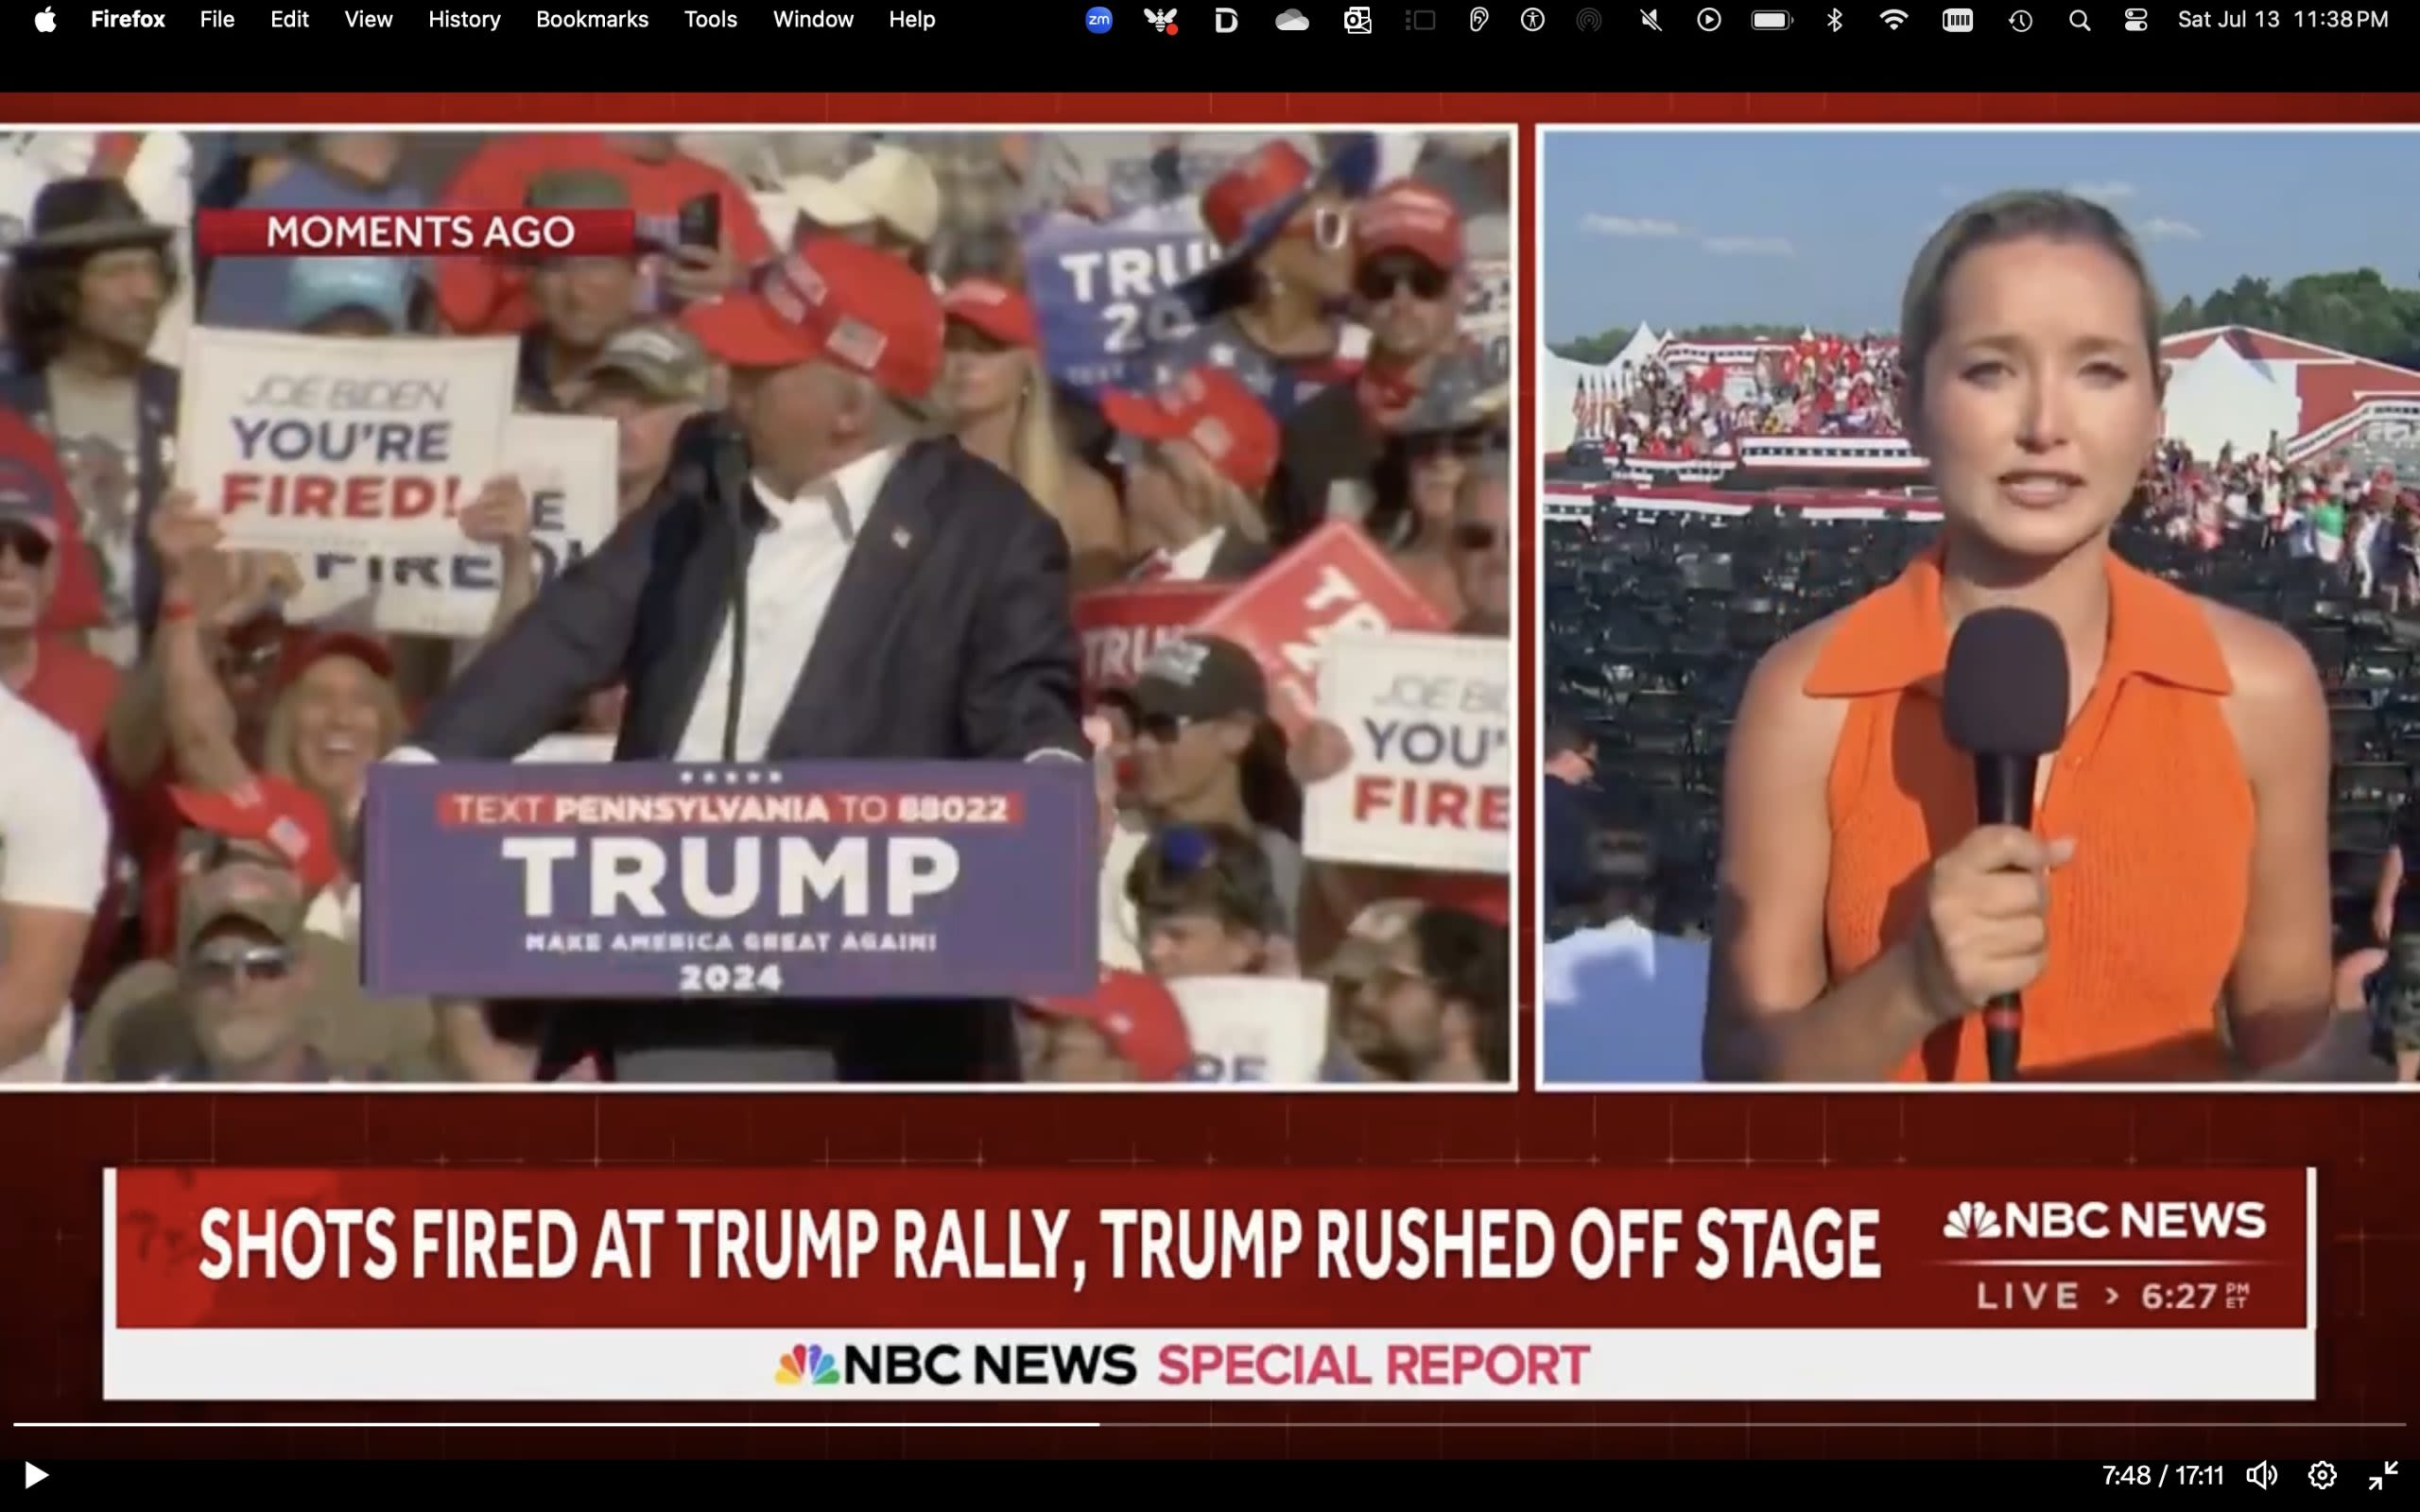 Here’s How the News Networks Covered the Trump Rally Shooting (Updated)